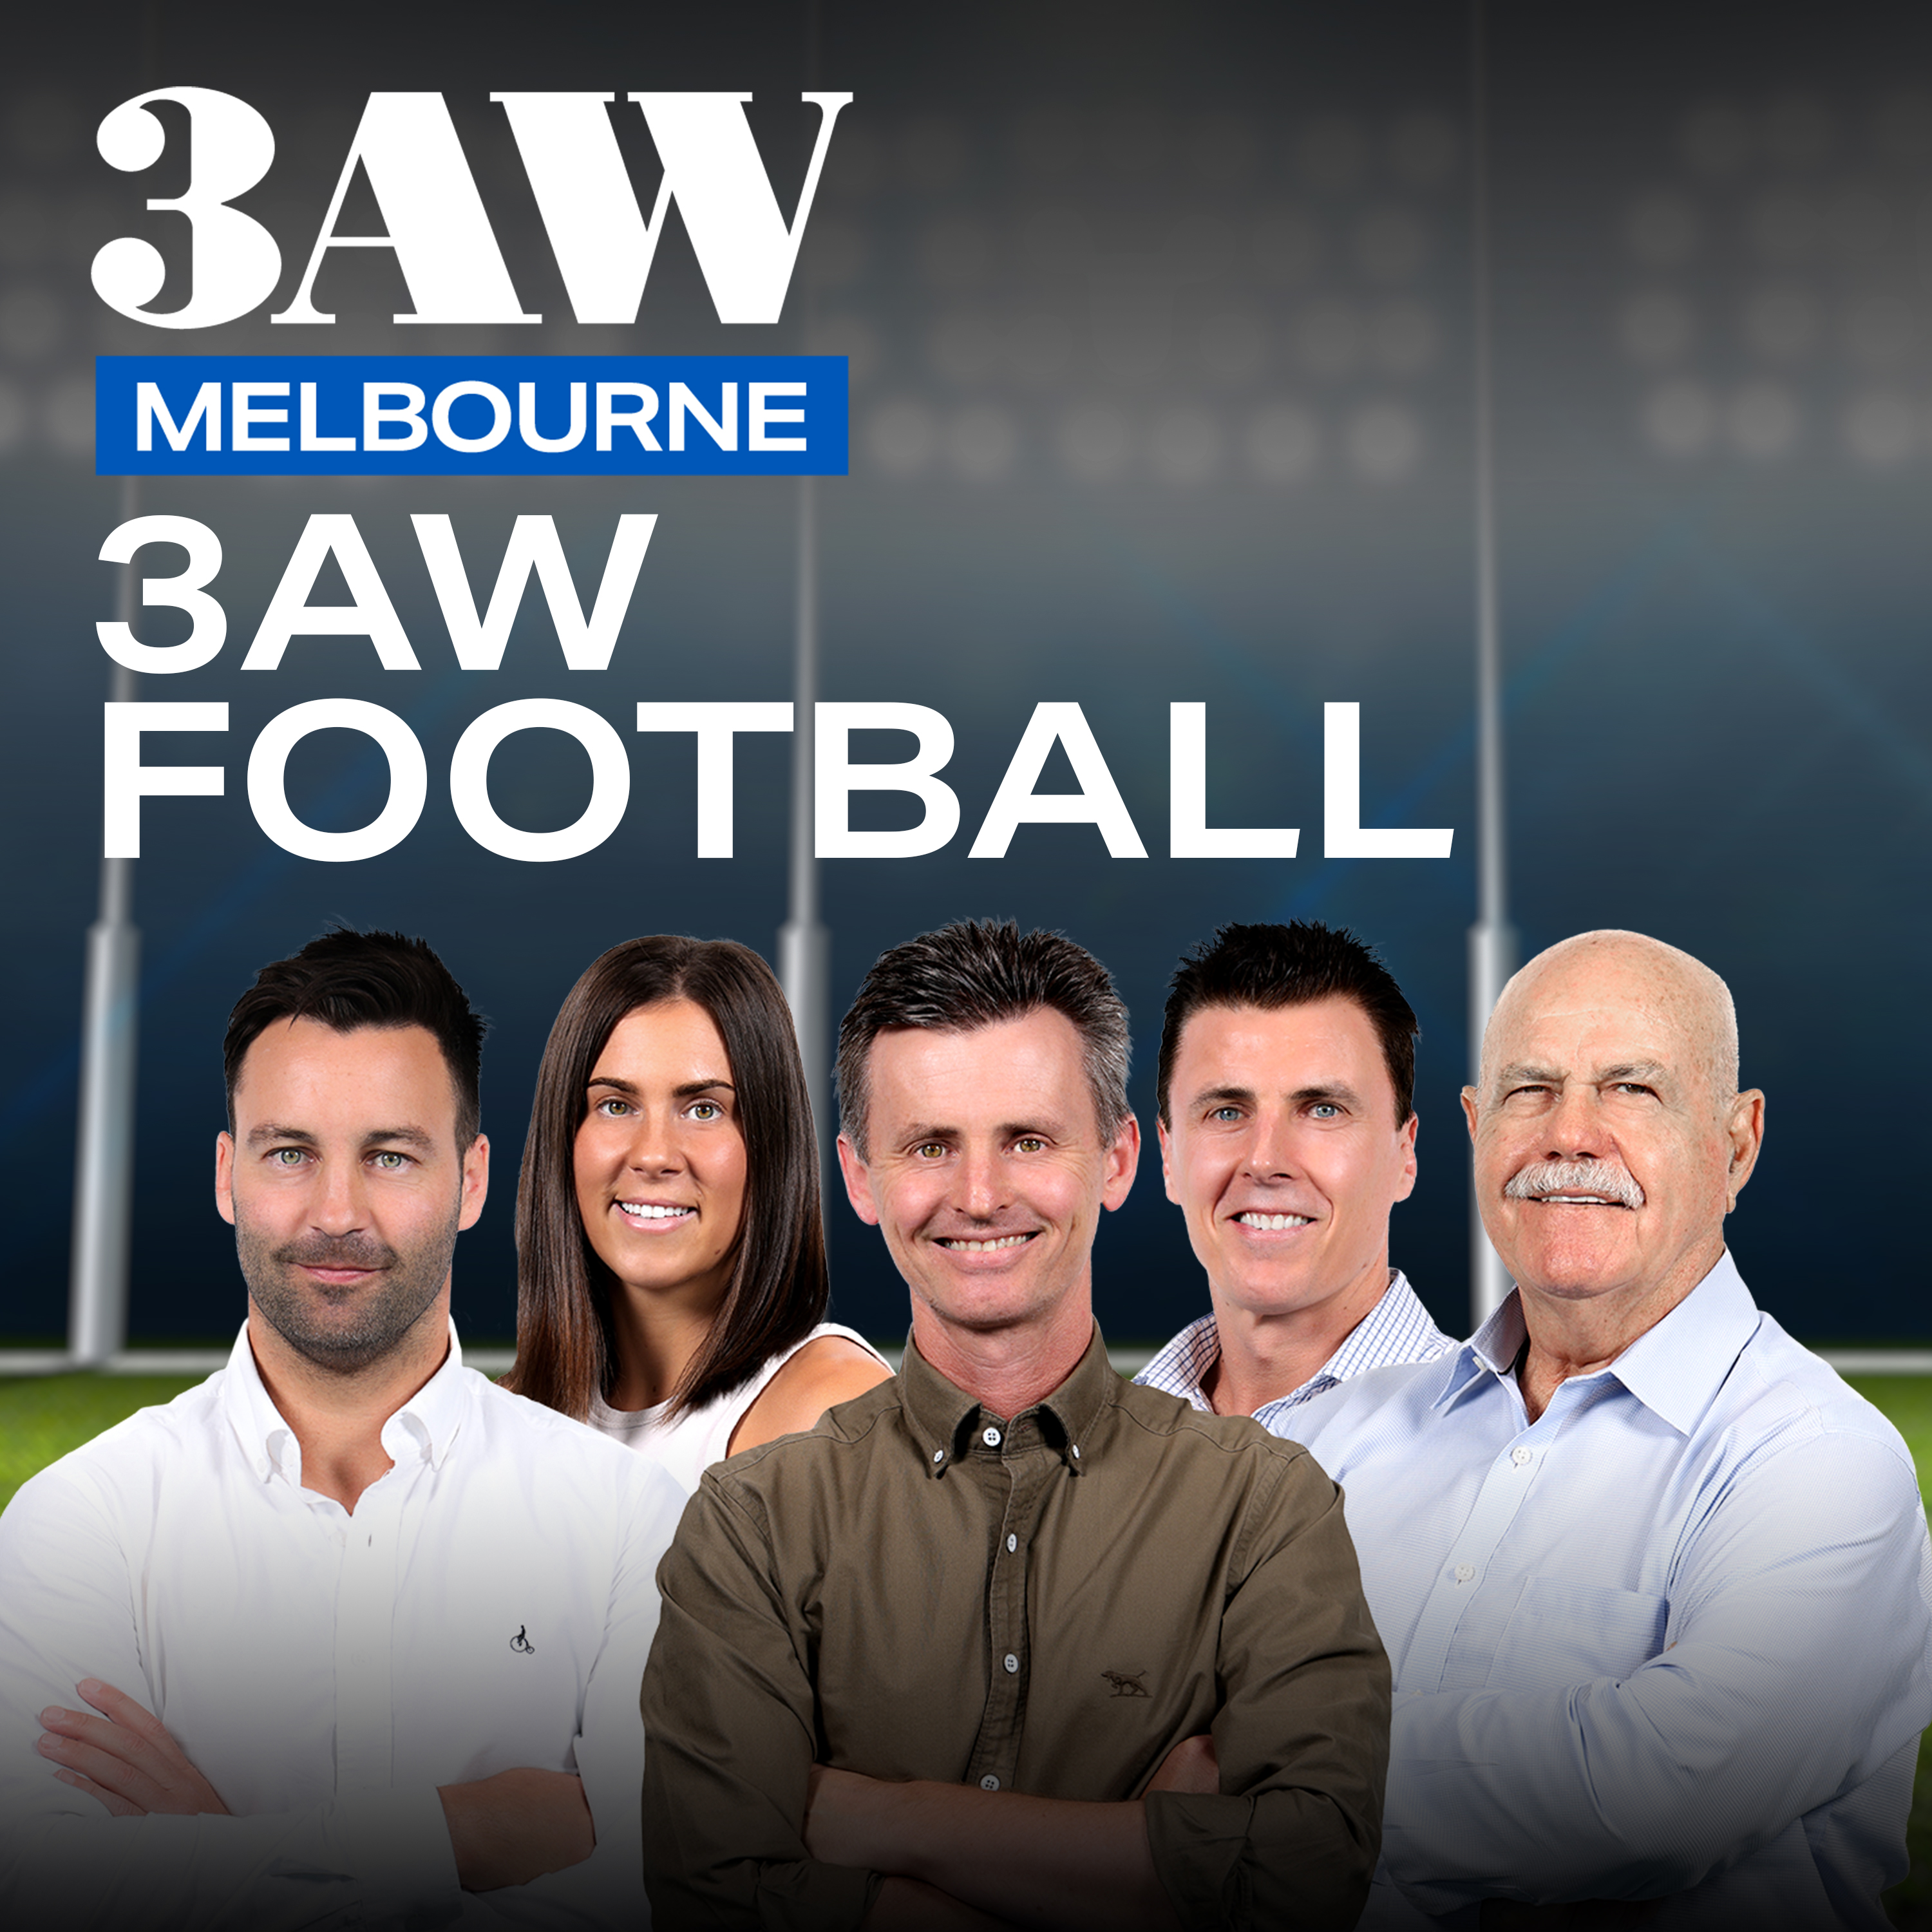 Joe Daniher gives 3AW Football an injury update before the clash with Collingwood